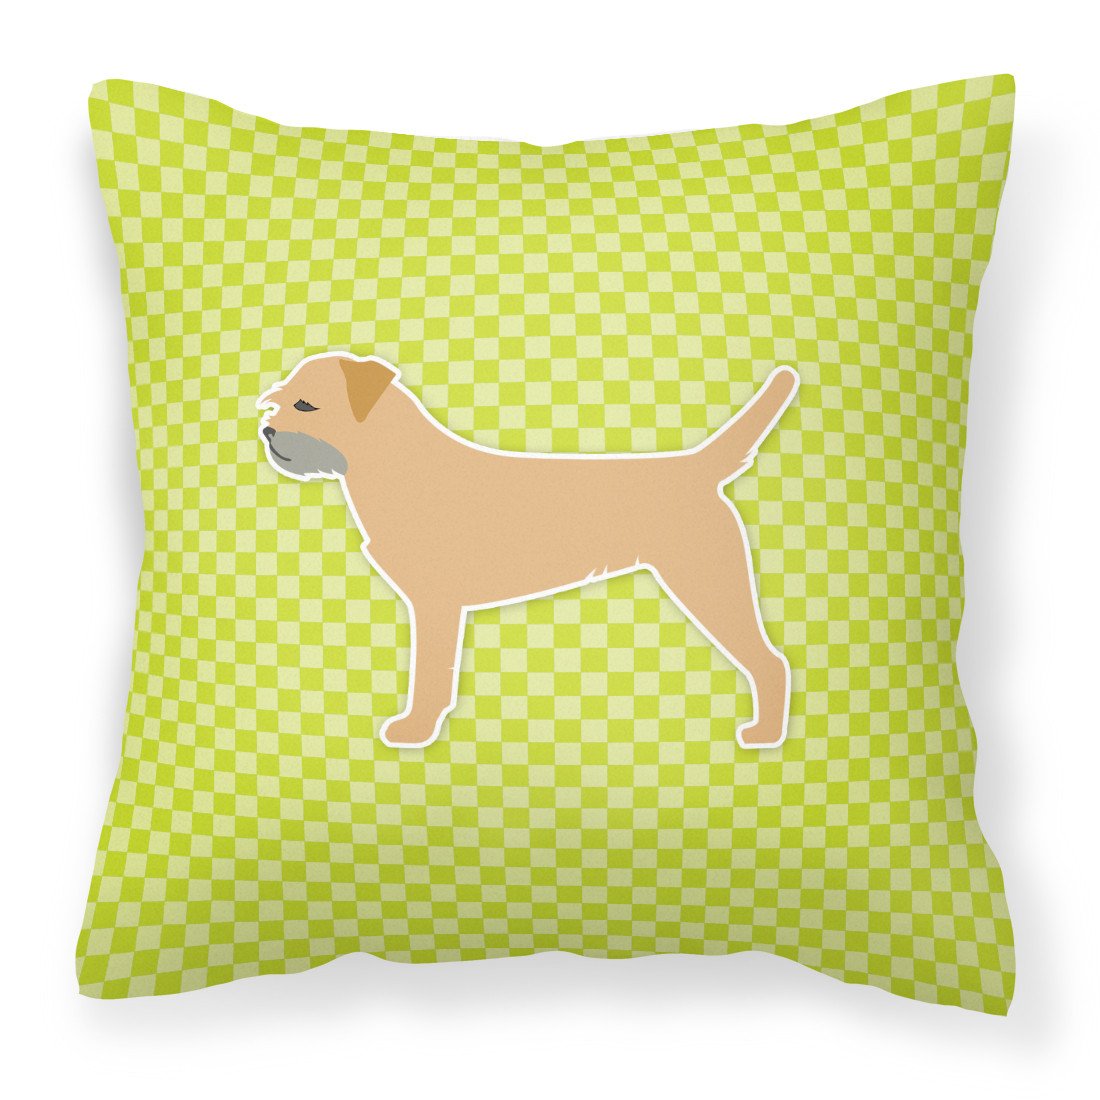 Border Terrier Checkerboard Green Fabric Decorative Pillow BB3789PW1818 by Caroline's Treasures